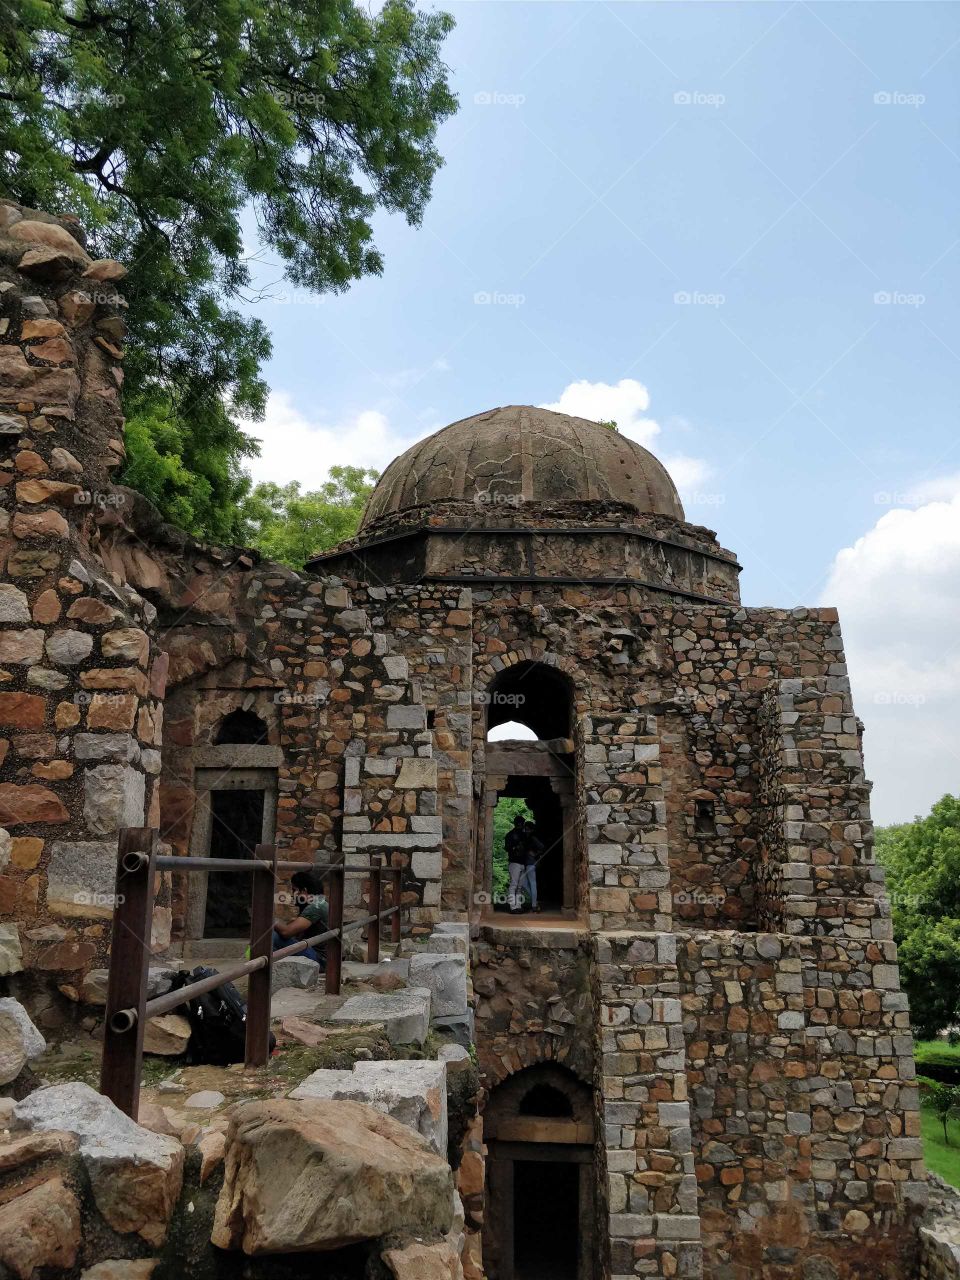 Hauz Khas in Delhi unravels a part of Emperor Ala-ud-din Khilji’s reign from his capital, Siri Fort. It was built in 1300 A.D. to ensure continuous water supply to the fort. Various monuments were constructed​ around hence its called the Royal tank.